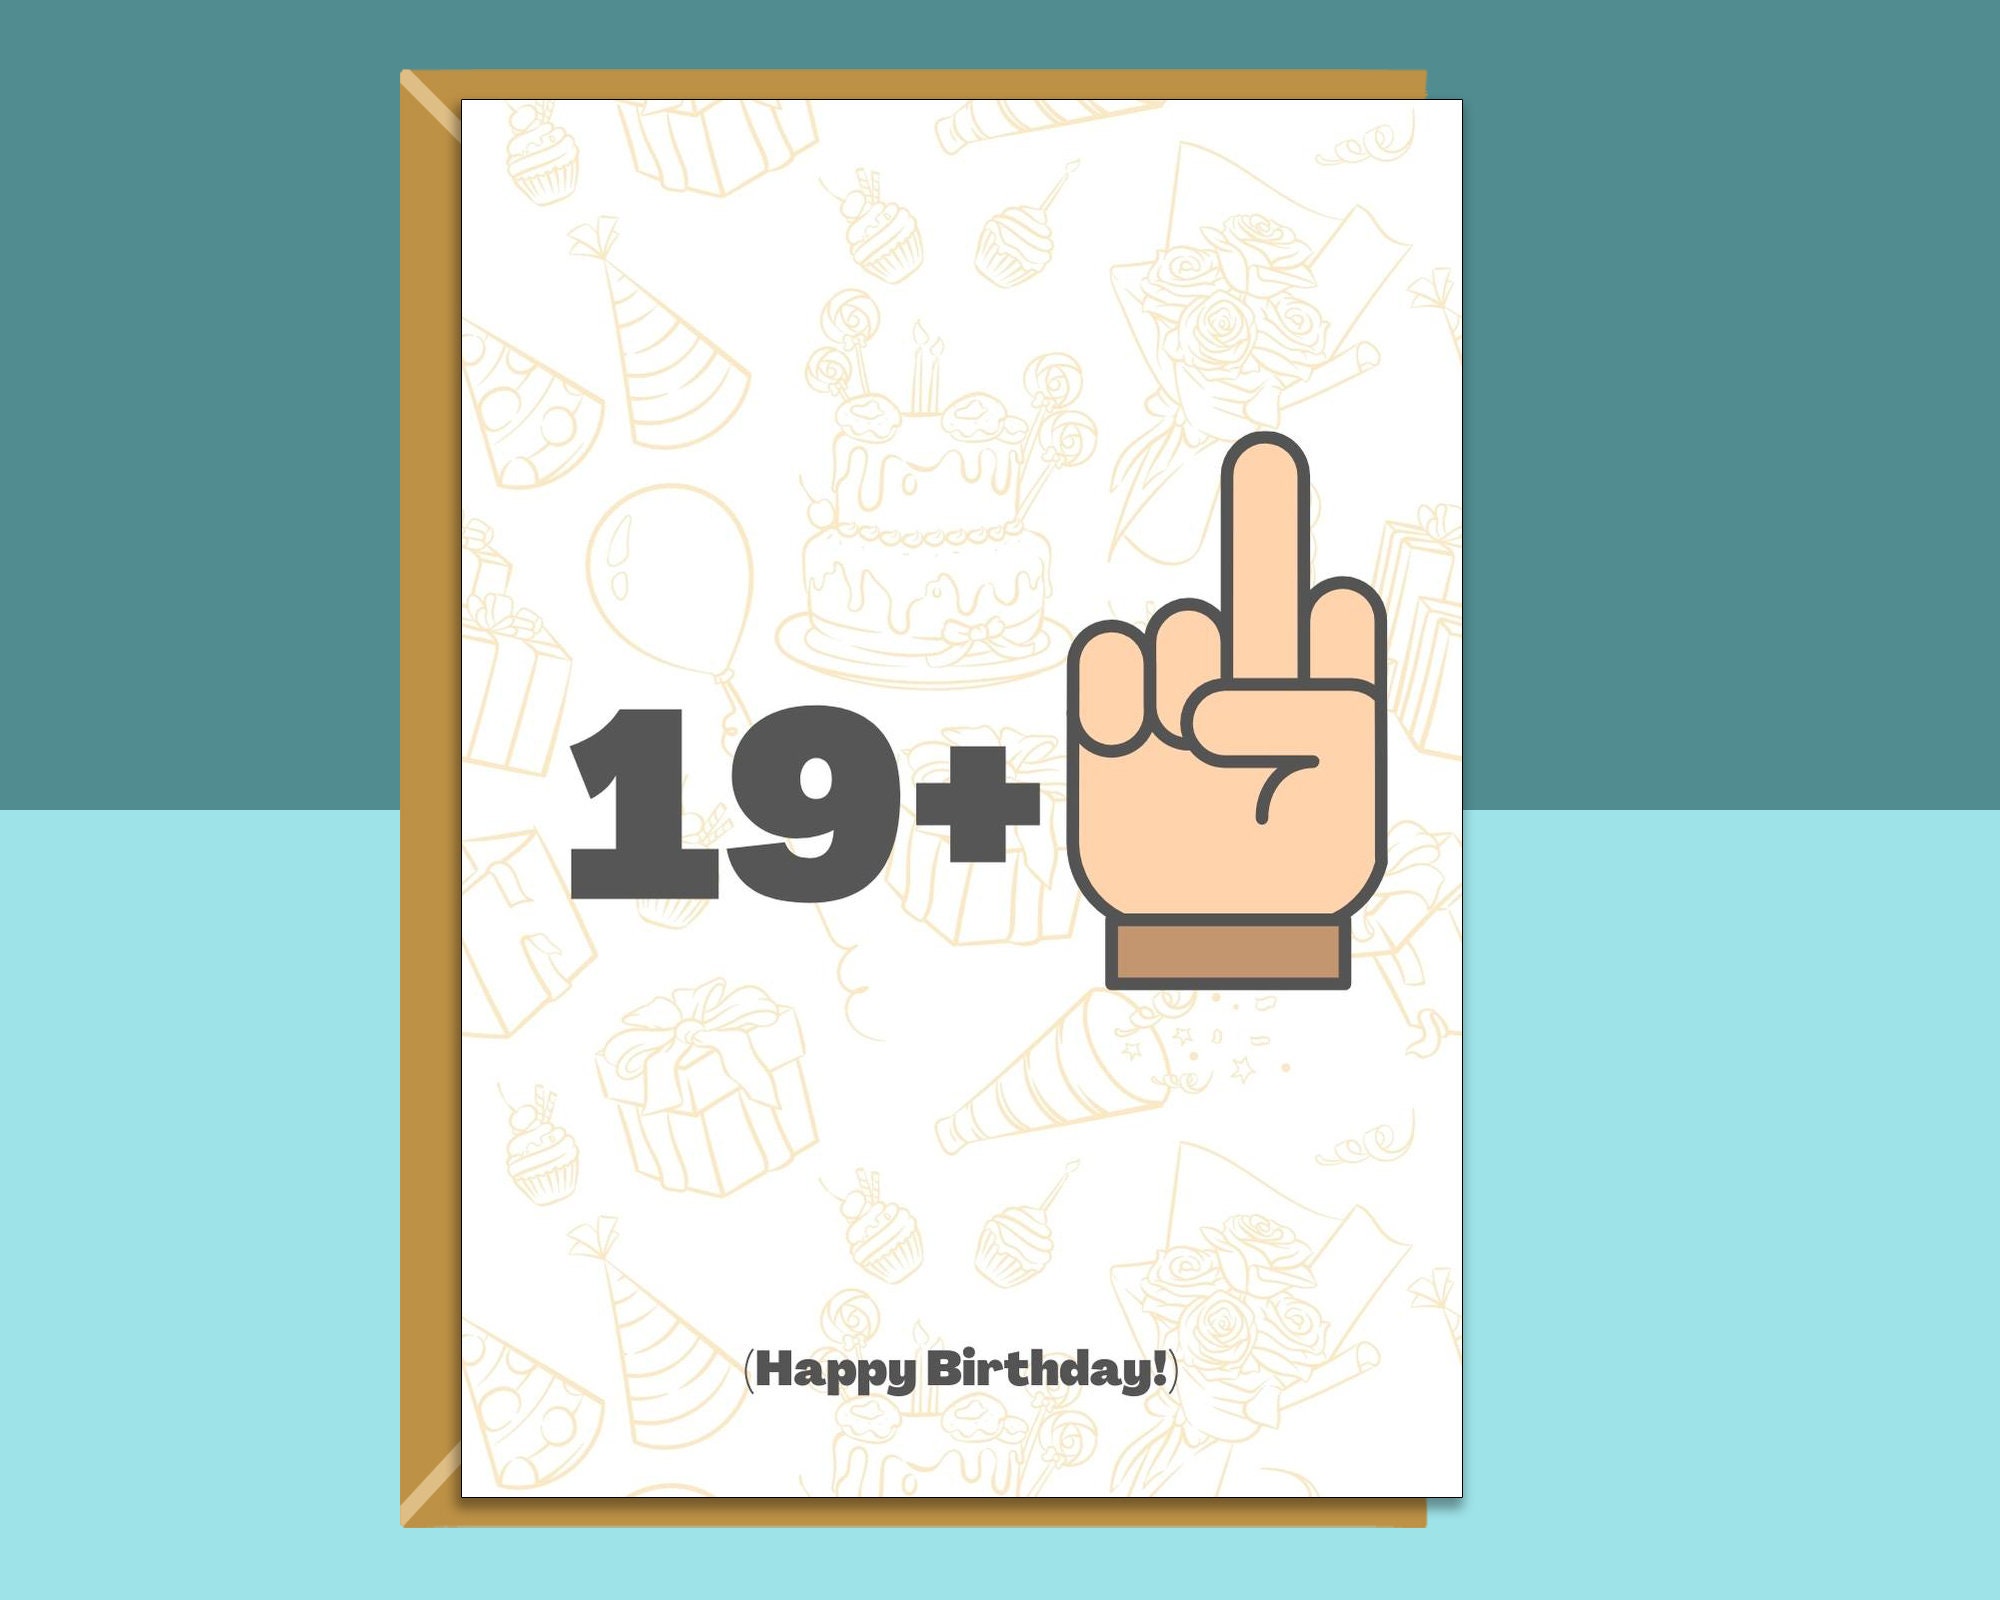 20 YEARS OF BEING AWESOME, 20th Birthday Gifts For Women And Men, Funny  Twenty Year Old, 20 Years Old Gift Sister Brother Friends Greeting Card  for Sale by designood